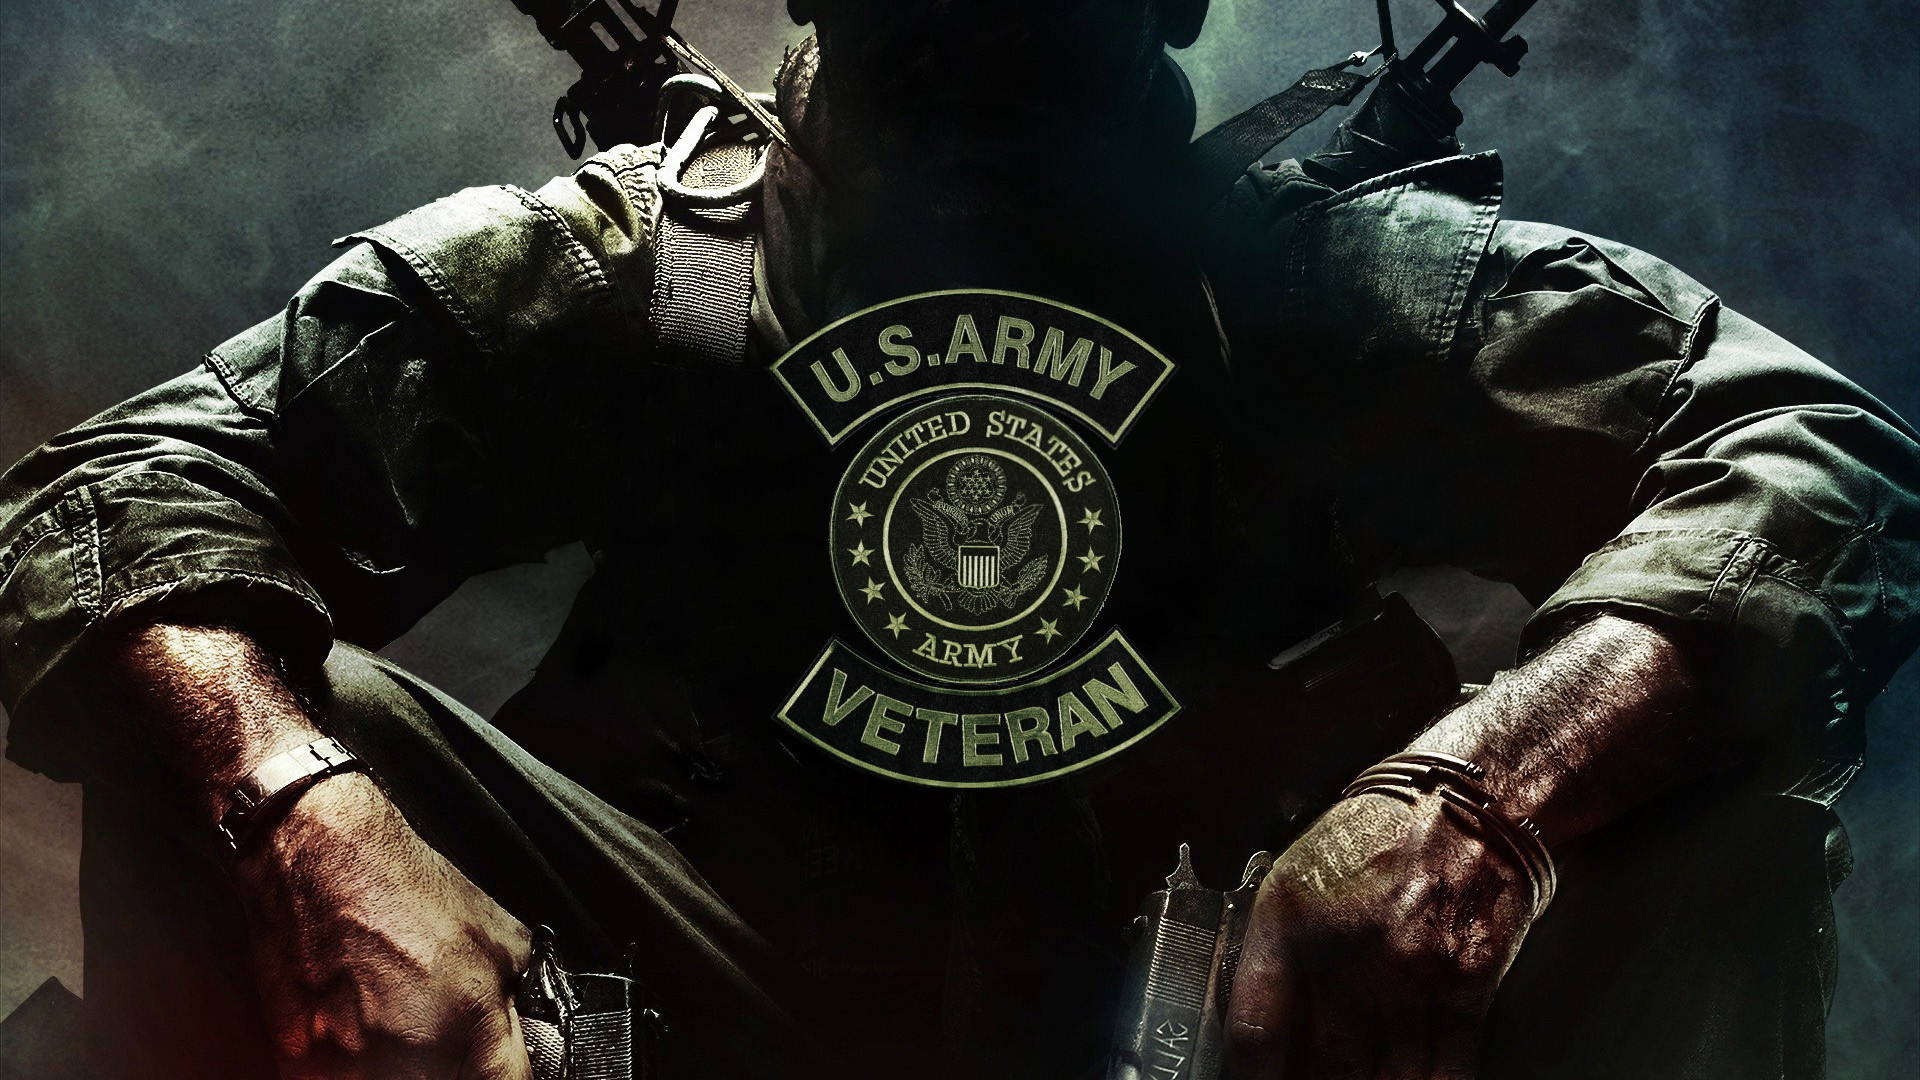 1080x1920  1080x1920 zombie army 4 games hd for Iphone 6 7 8 wallpaper   Coolwallpapersme